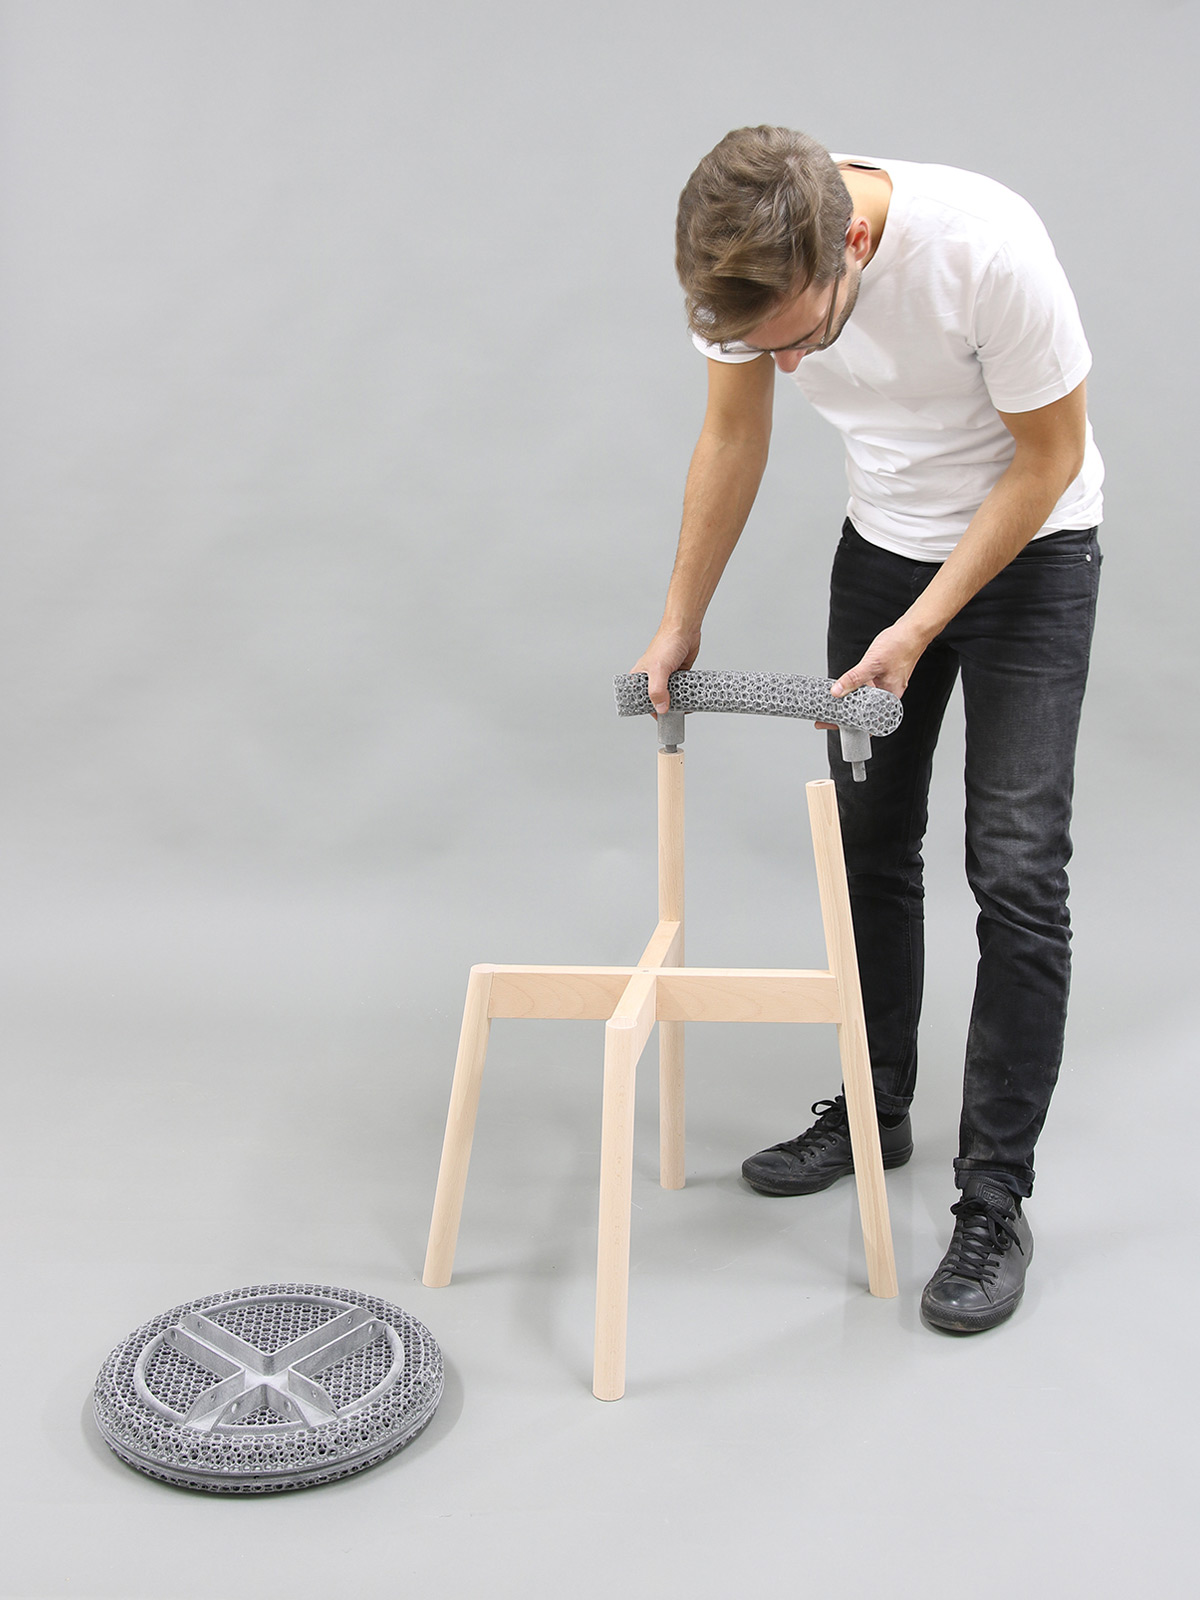 A white man with short hair and glasses shows how a chair with a wooden substructure and mesh seat can be disassembled separately.